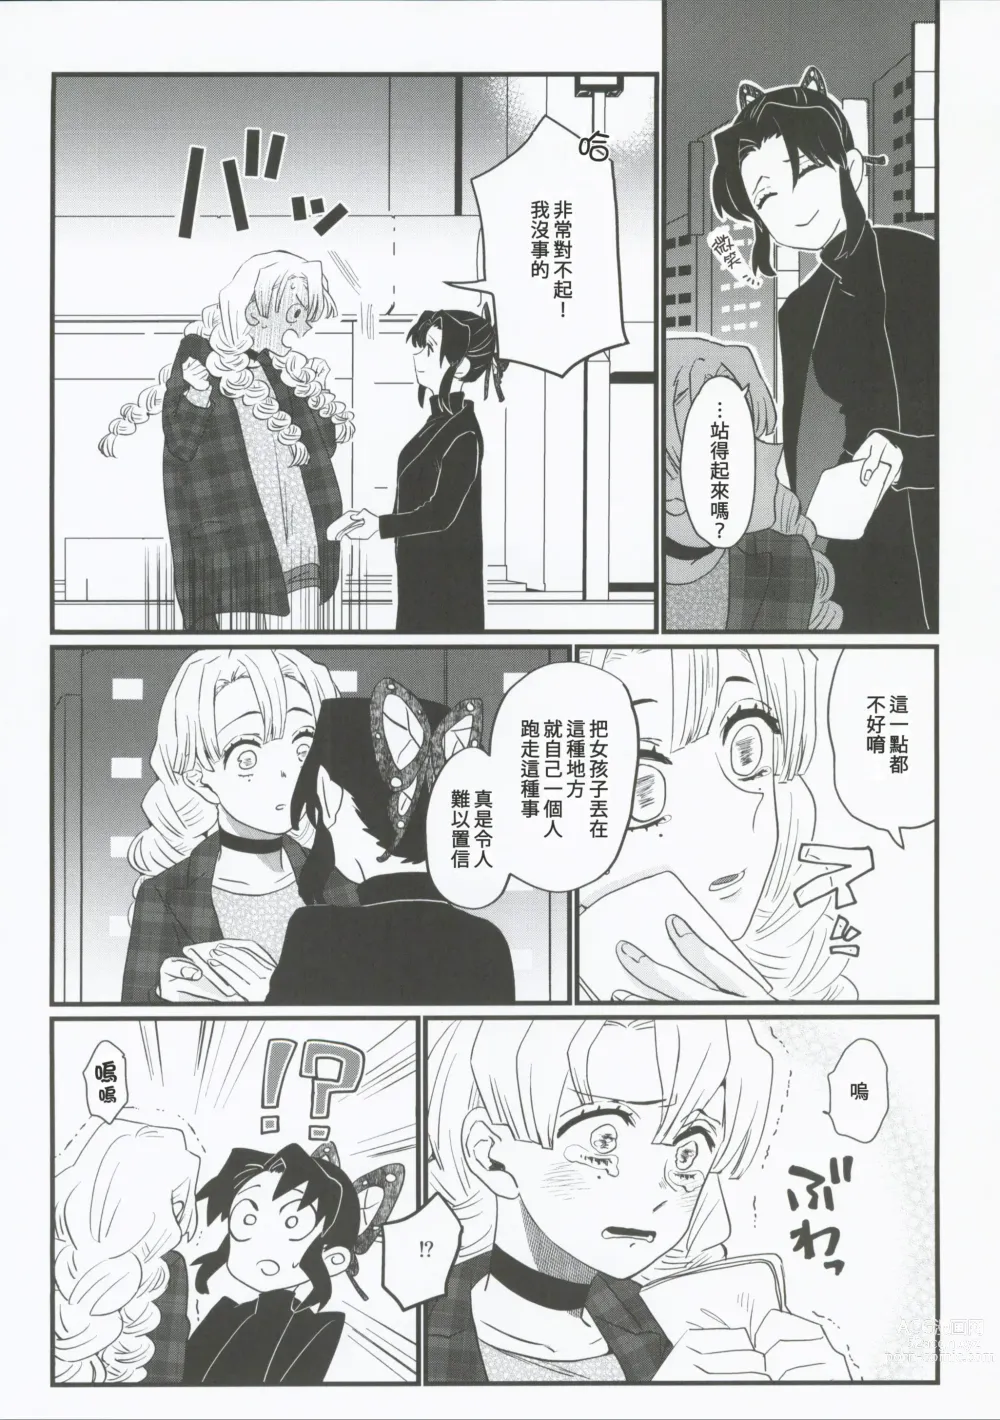 Page 8 of doujinshi 屬於妳的Omega